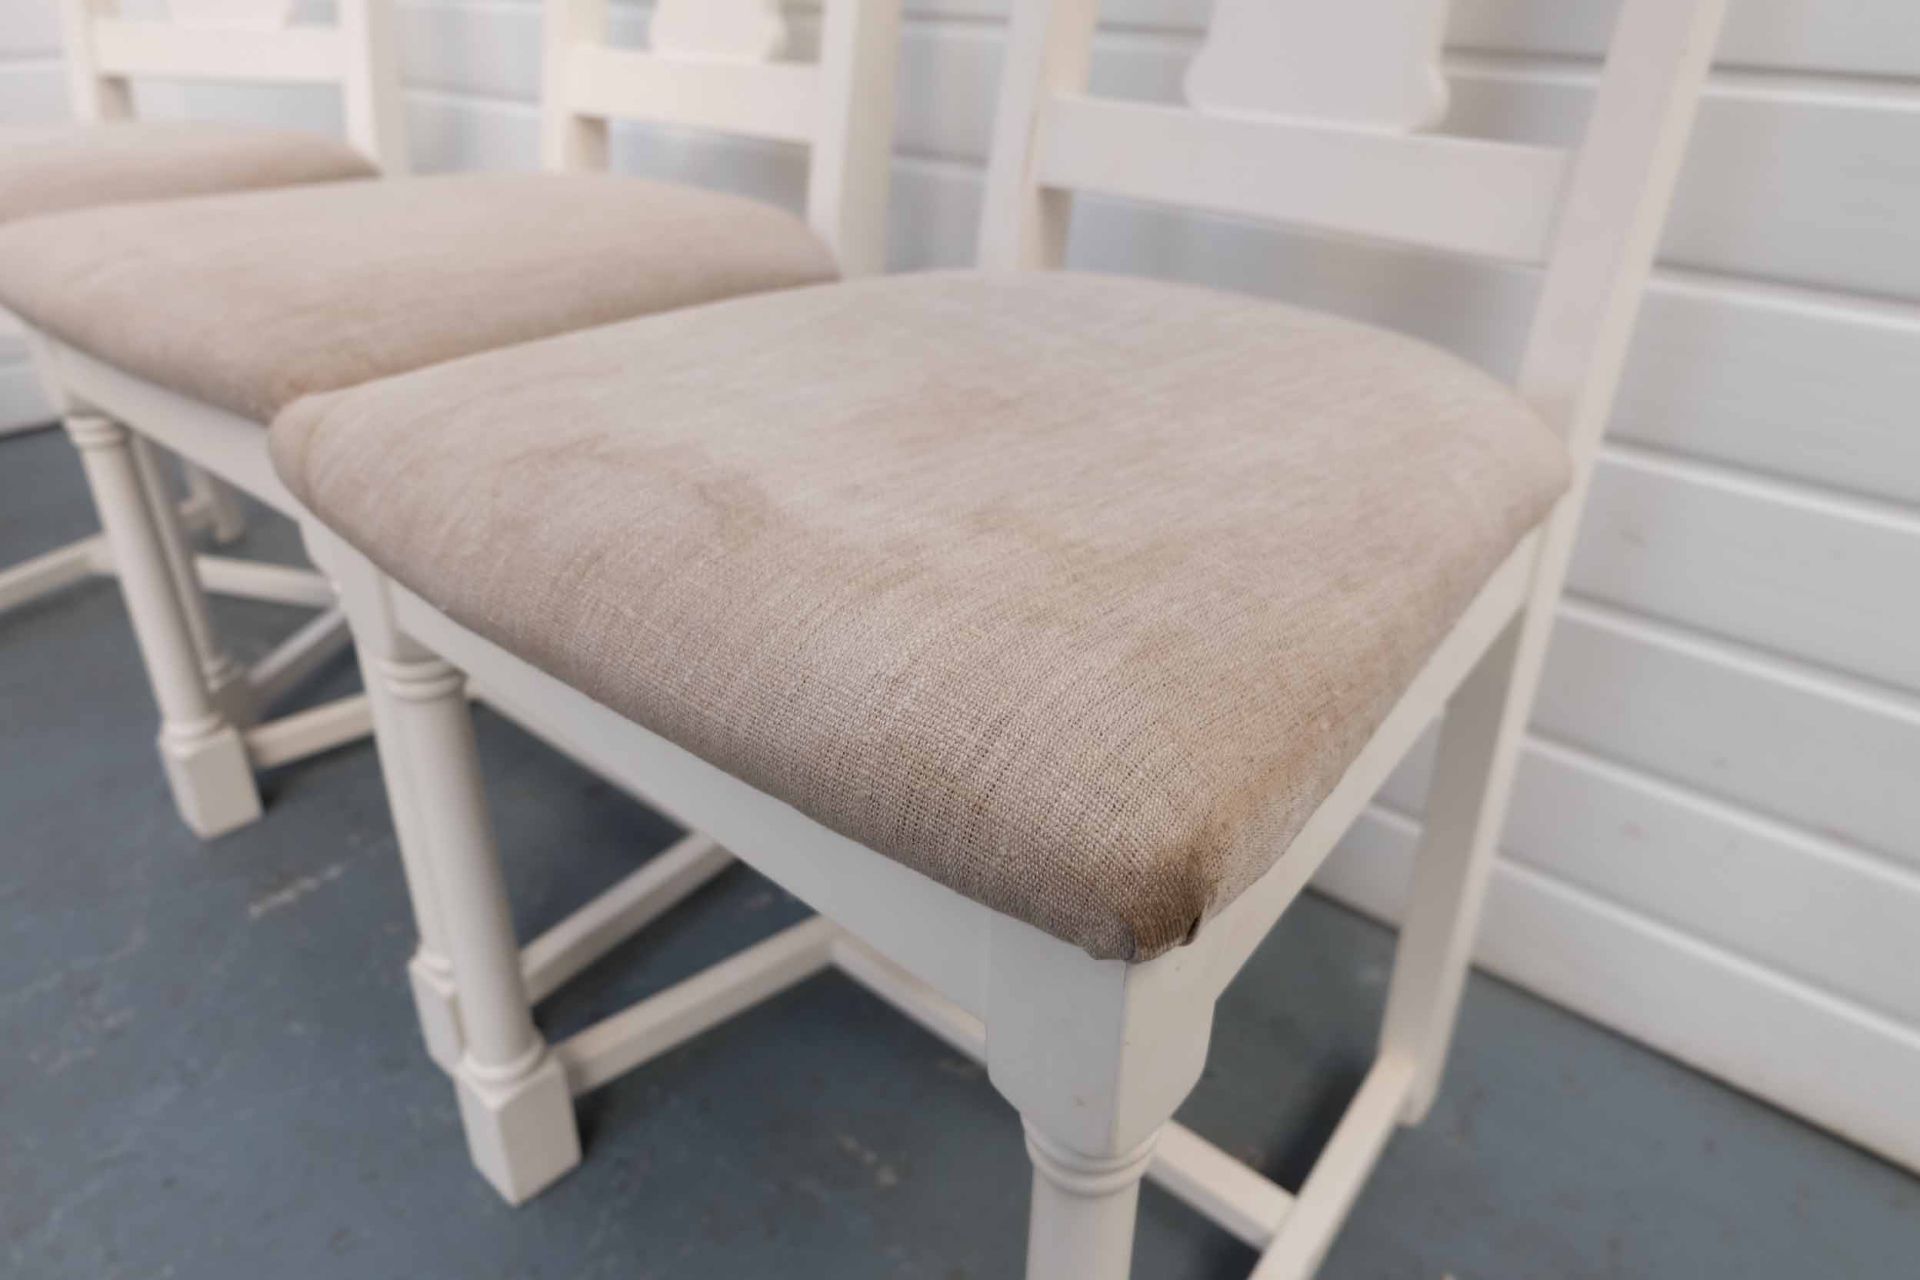 Set of 5 White Wooden Dining Chairs With Upholstered Seats. - Image 6 of 8